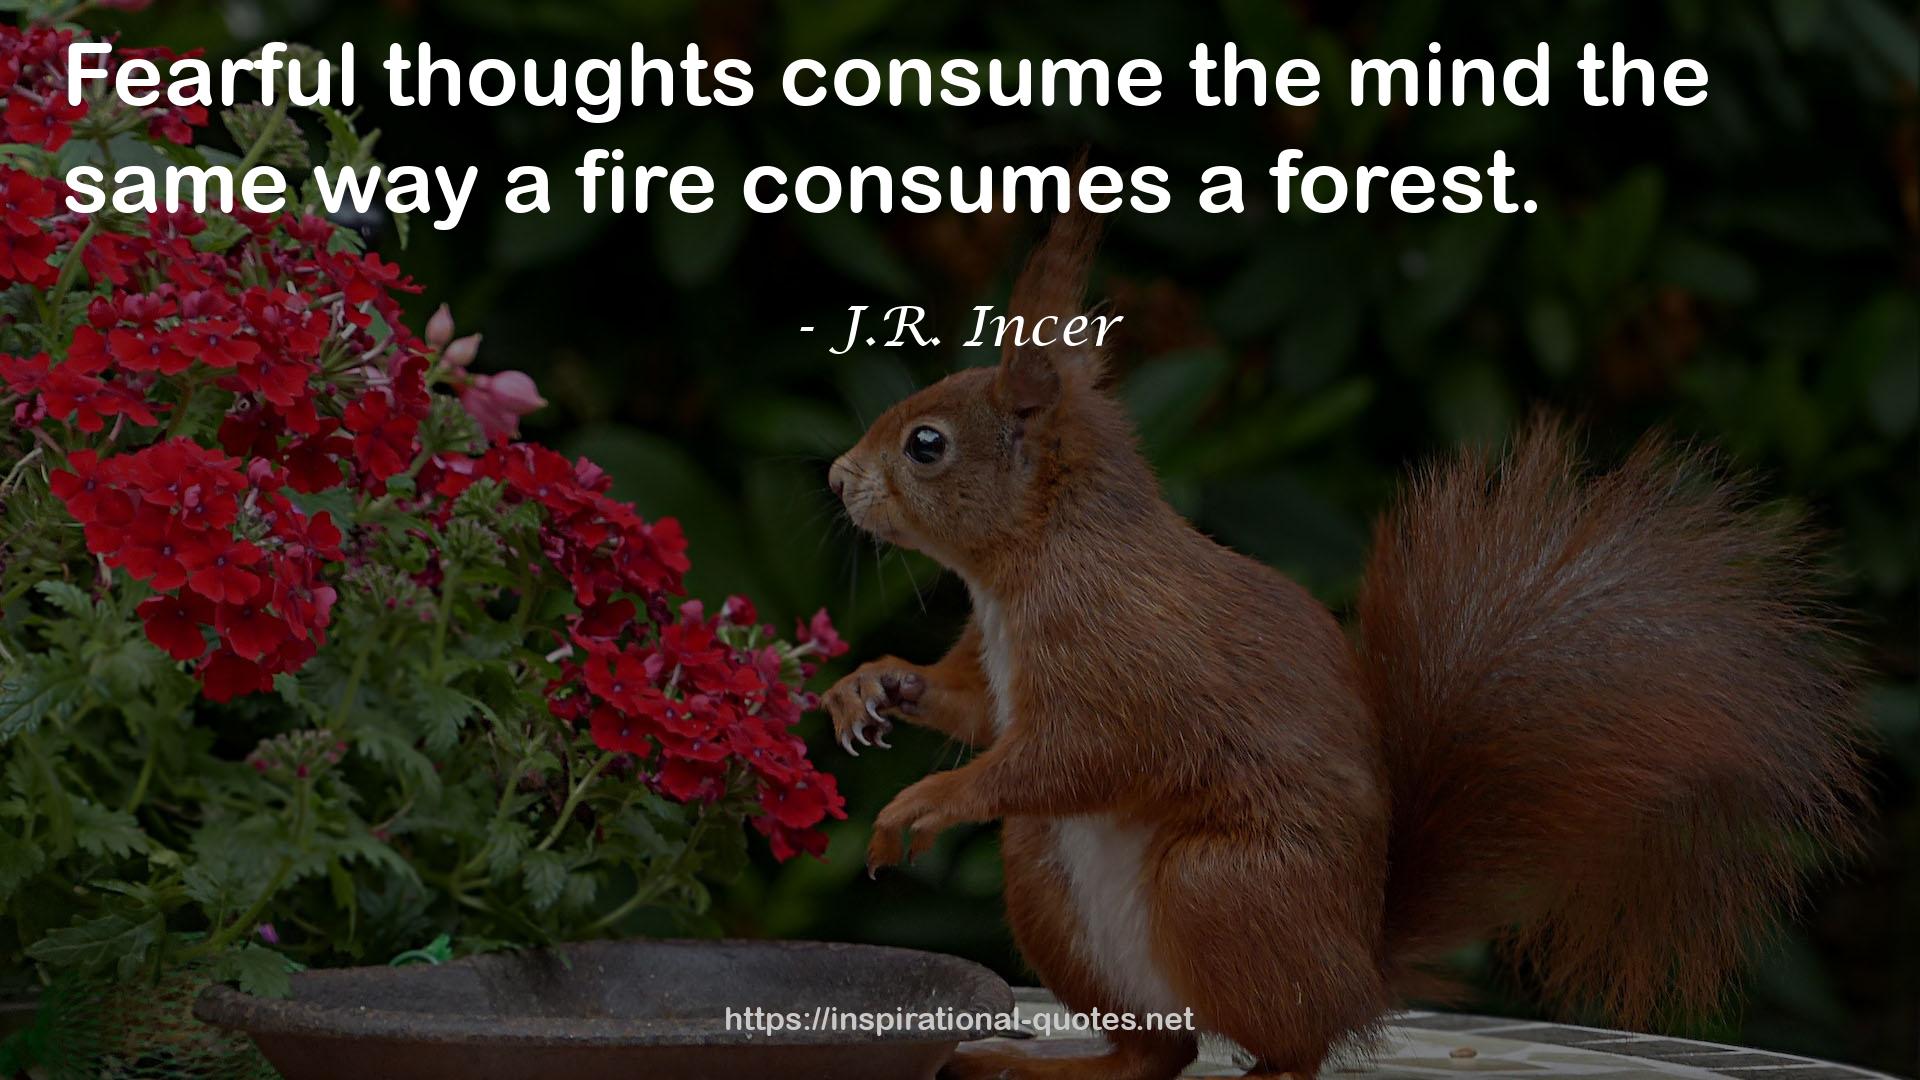 J.R. Incer QUOTES